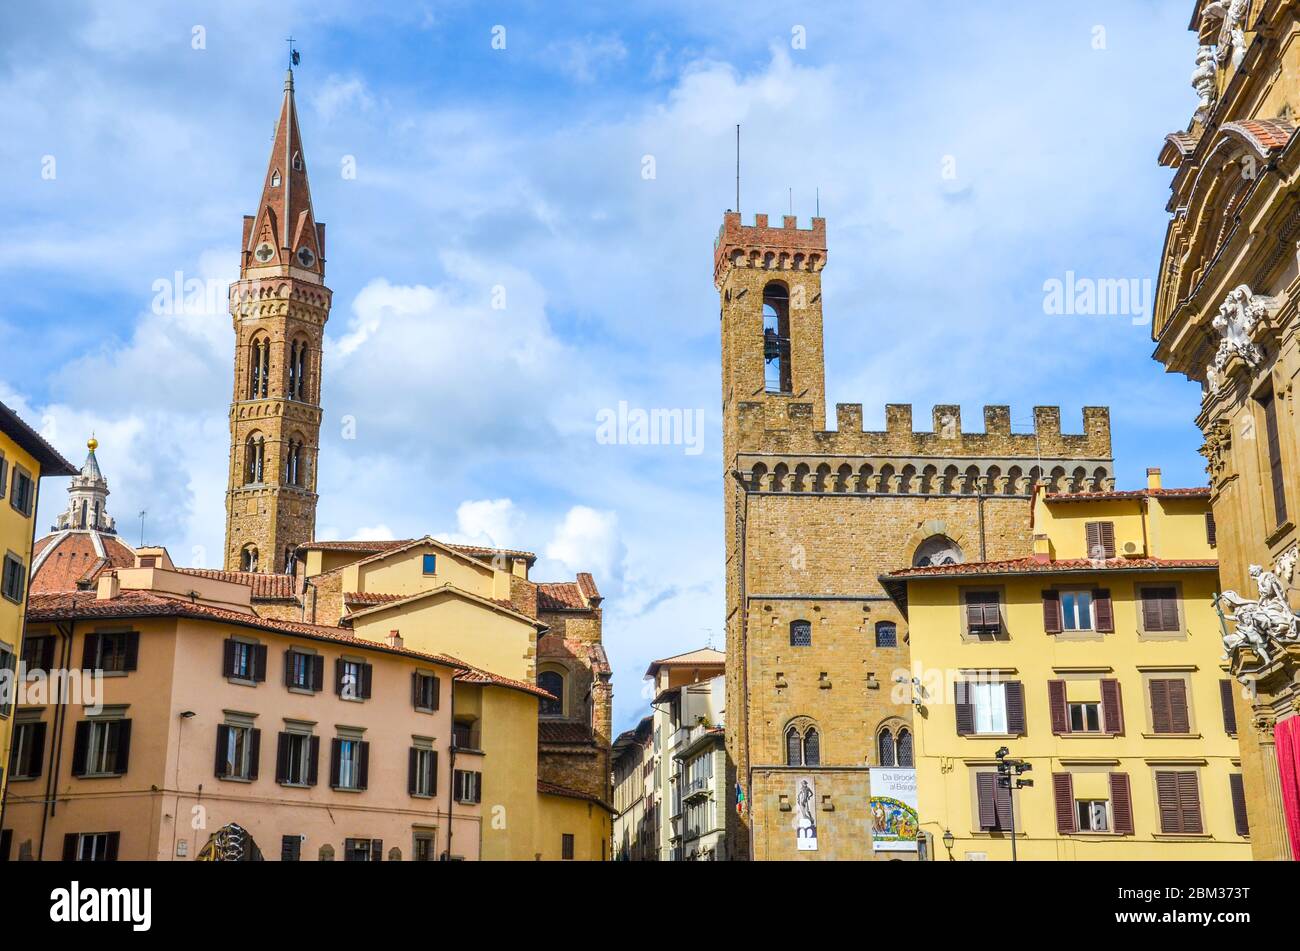 Florence, Tuscany, Italy - March 31, 2018: The tower of the Badia Fiorentina and National Museum of Bargello in the historical center of the beautiful Italian city. Horizontal photo. Stock Photo